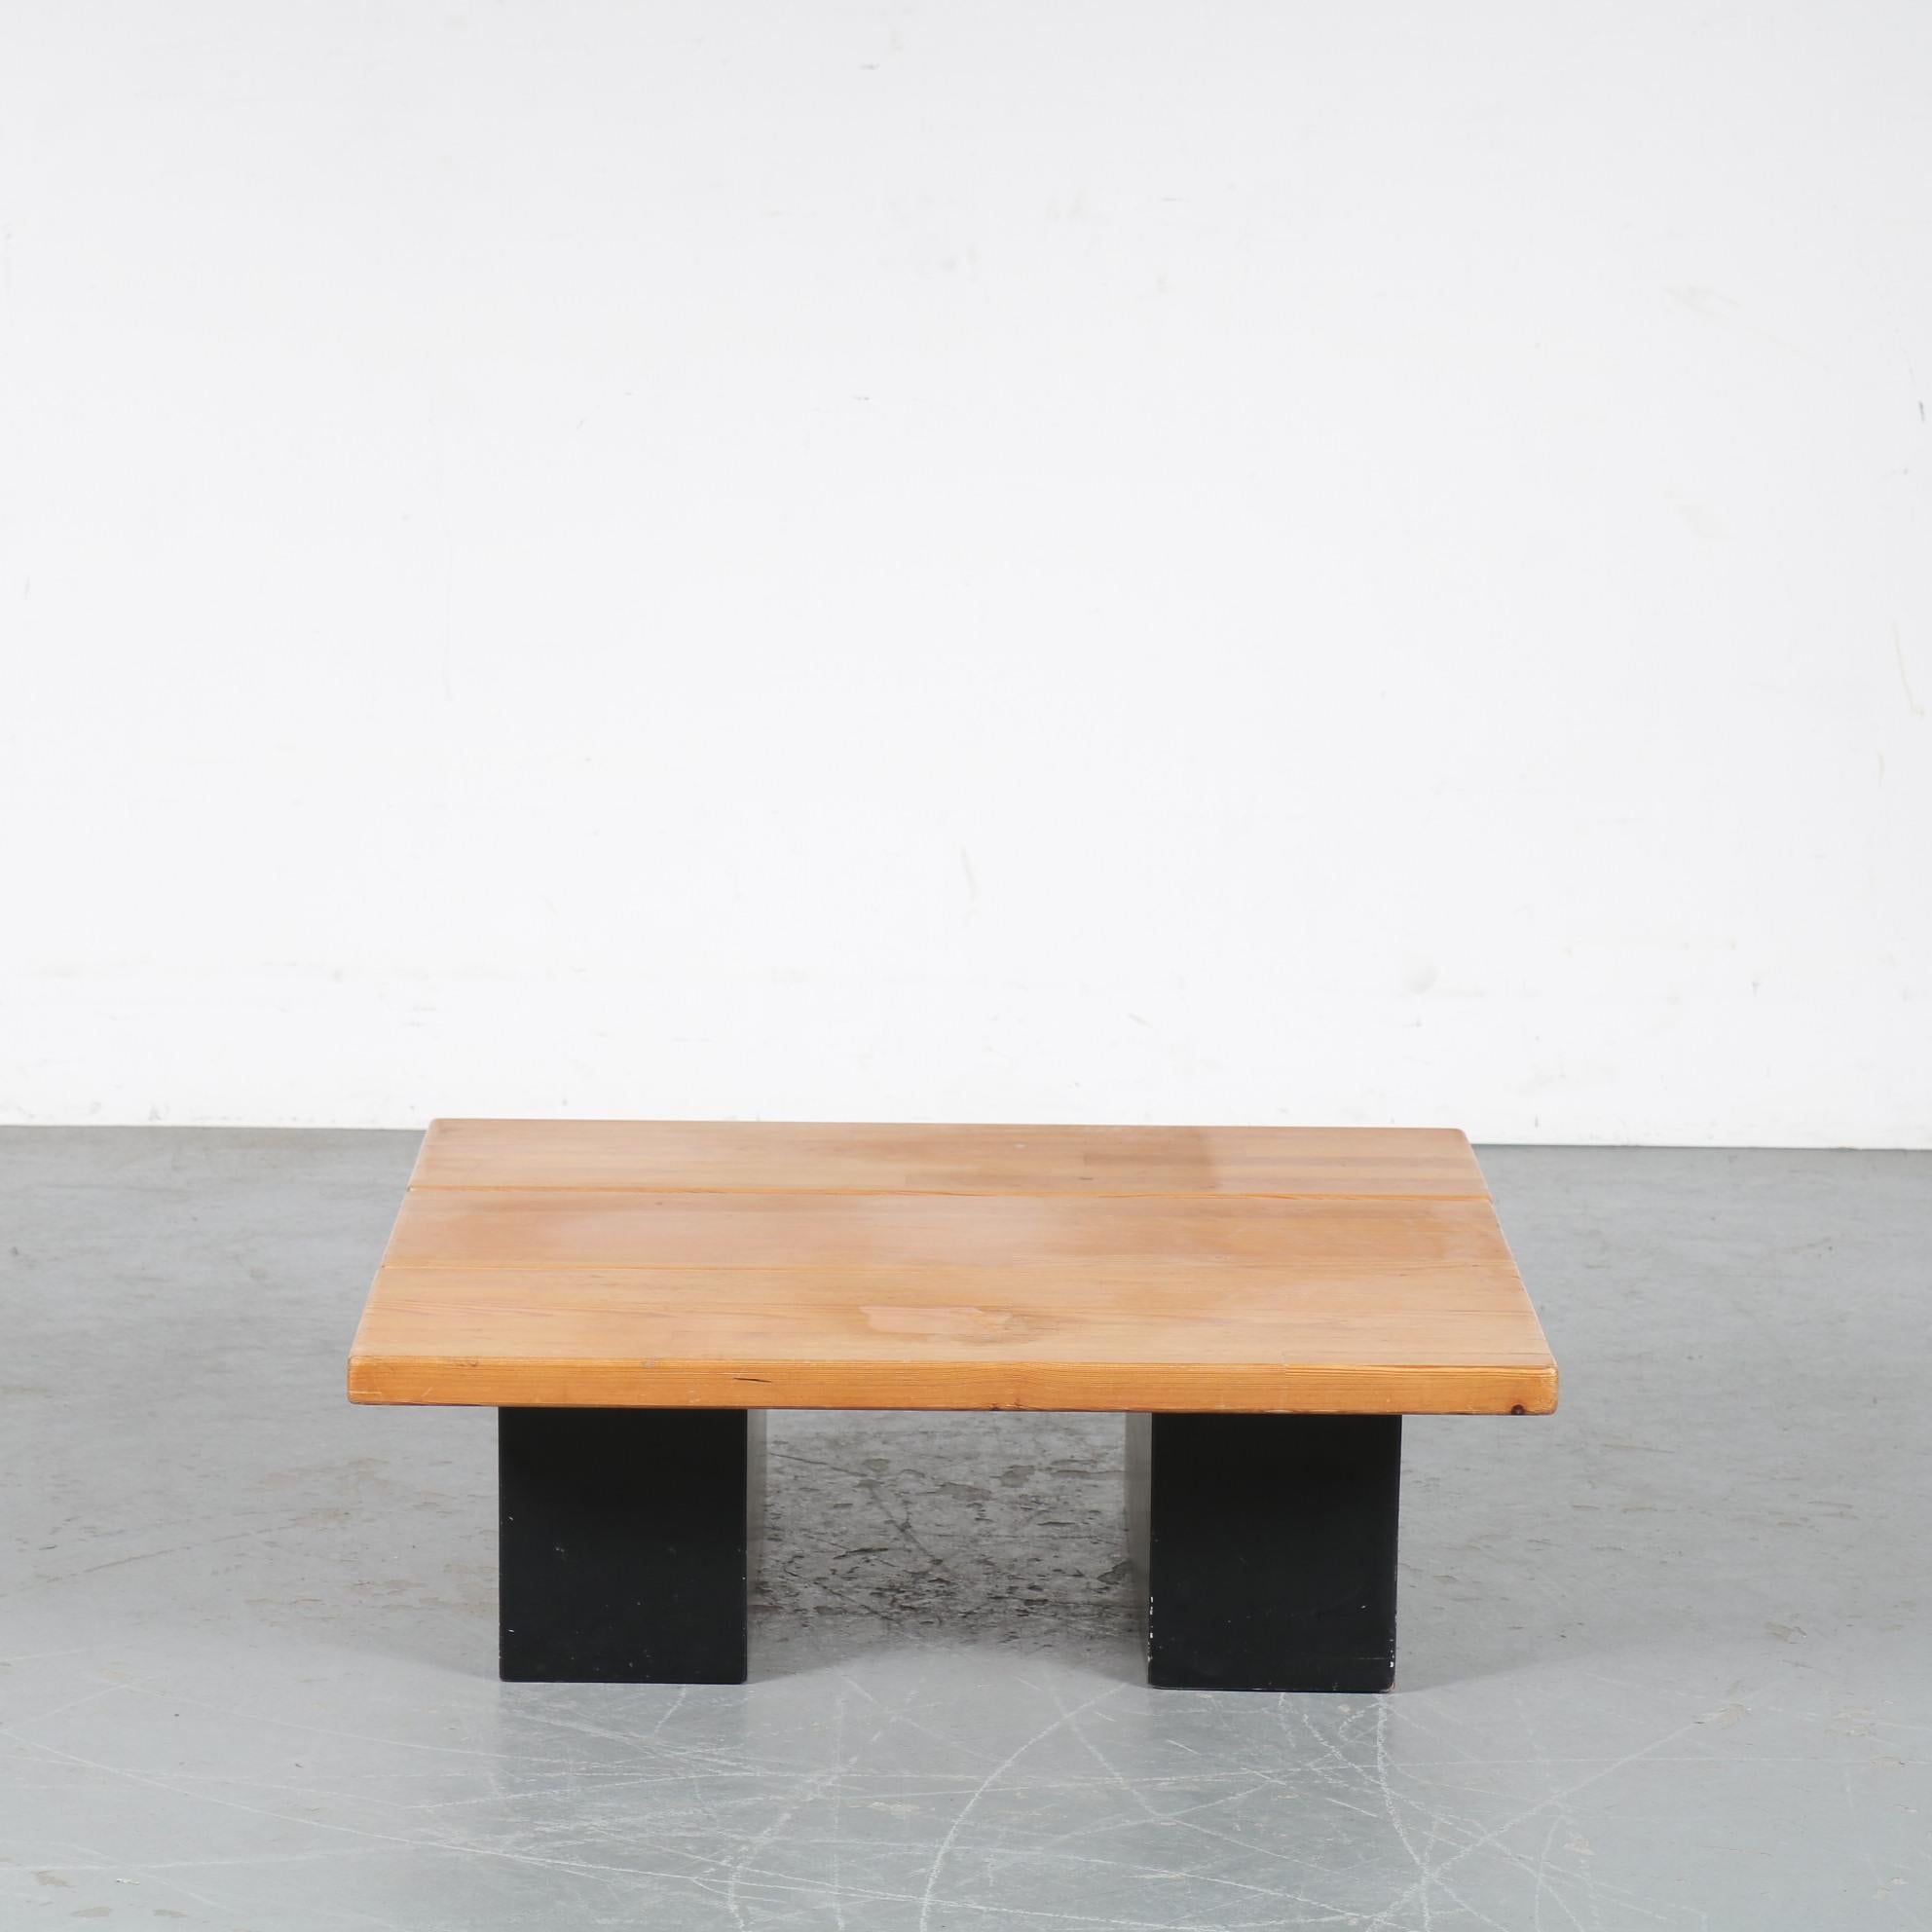 This is an eye-catching wooden coffee table designed by Ilmari Tapiovaara, manufactured by Laukaan Puu in Finland around 1950.

It is made of two different tones of wood. The base is a deep black lacuqered wood, while the pine wooden square top of